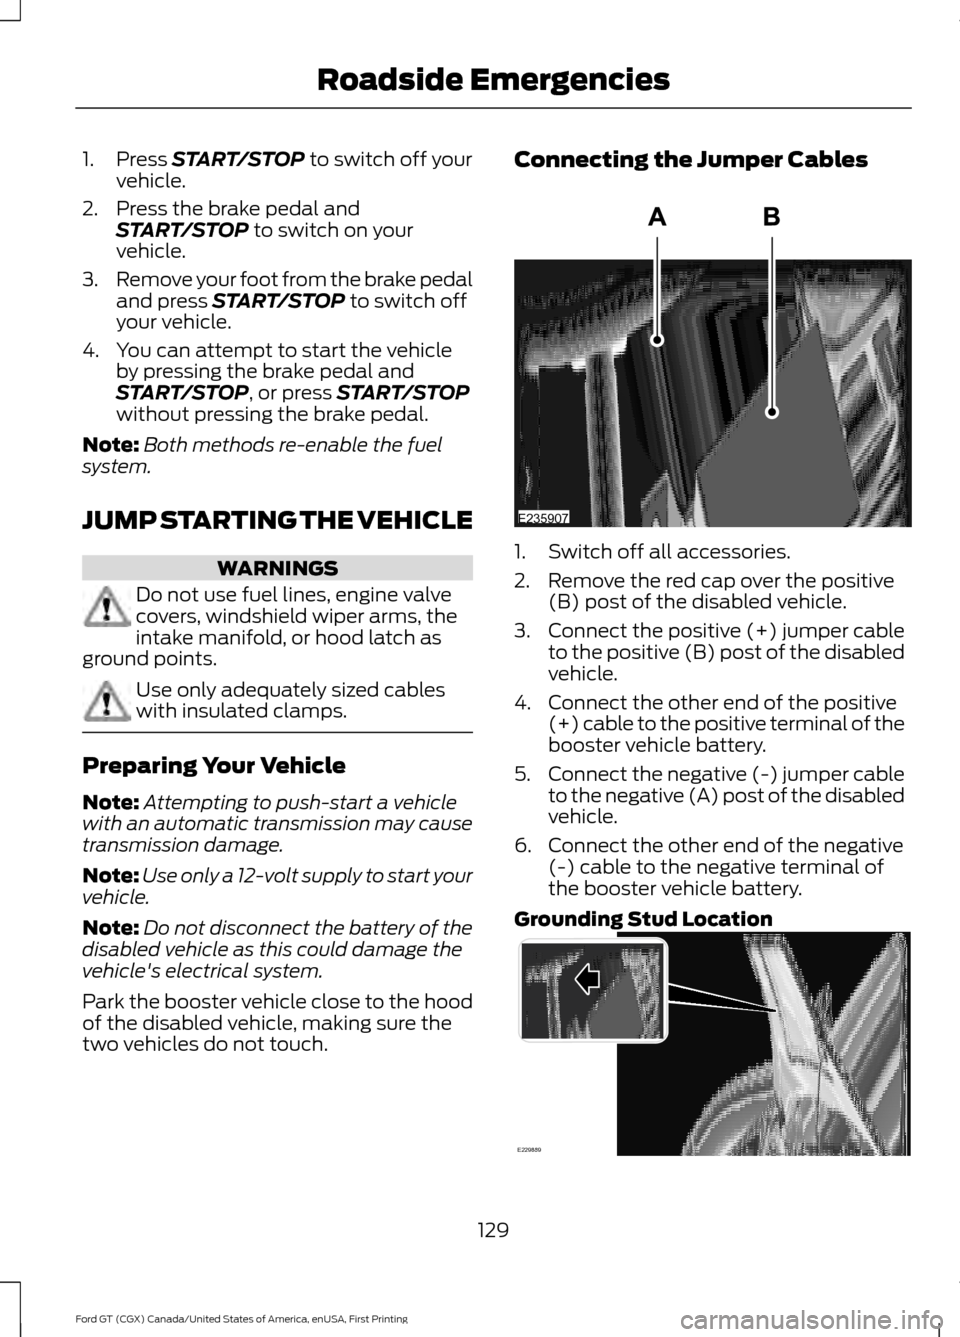 FORD GT 2017 2.G Owners Manual 1. Press START/STOP to switch off your
vehicle.
2. Press the brake pedal and START/STOP
 to switch on your
vehicle.
3. Remove your foot from the brake pedal
and press 
START/STOP to switch off
your ve